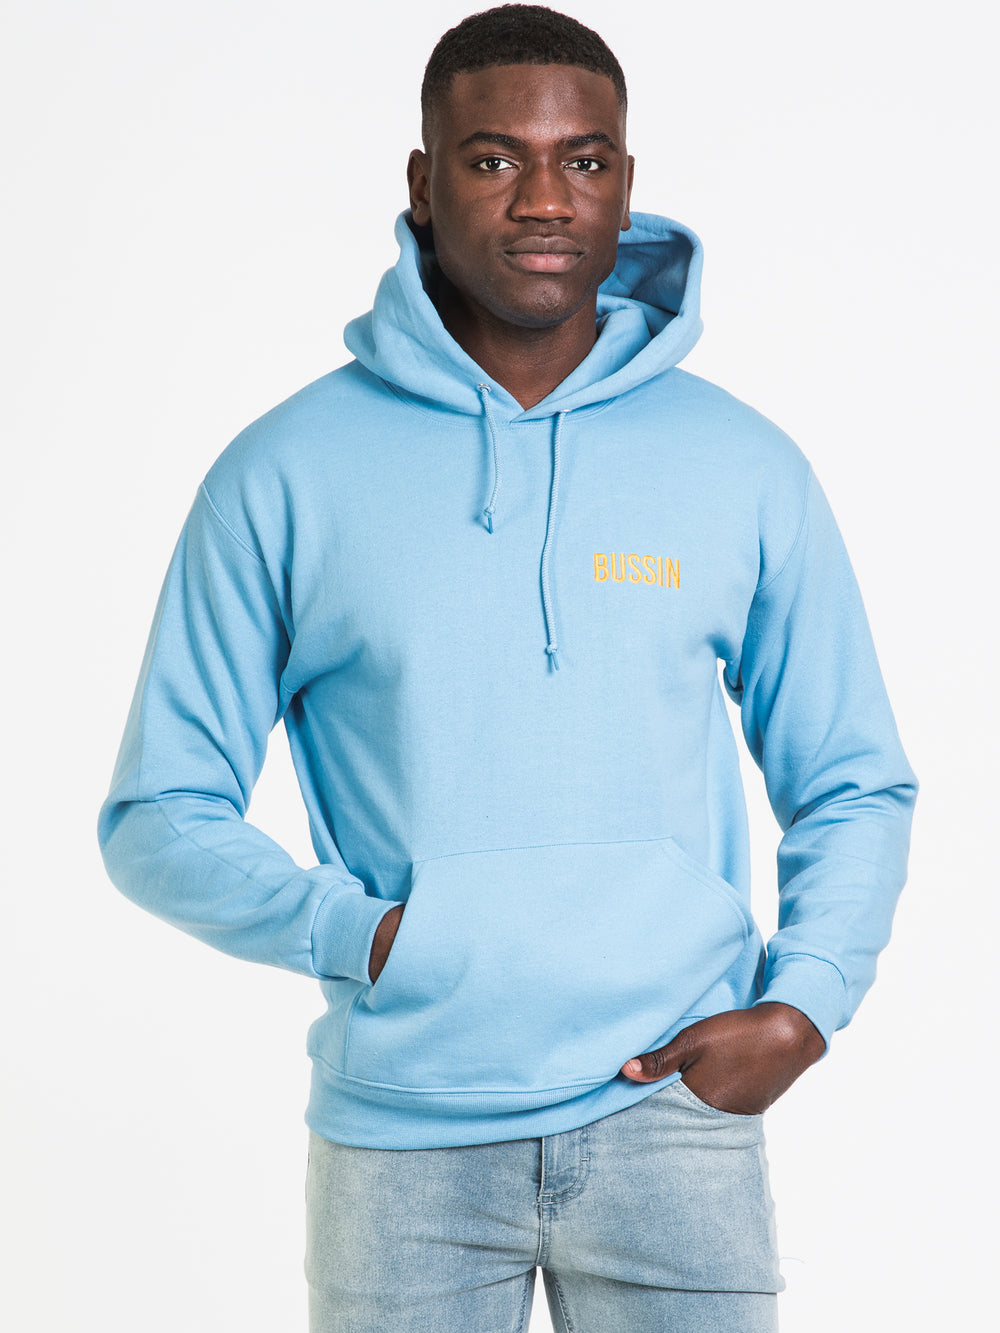 HOTLINE APPAREL BUSSIN EMBROIDERED HOODIE - CLEARANCE